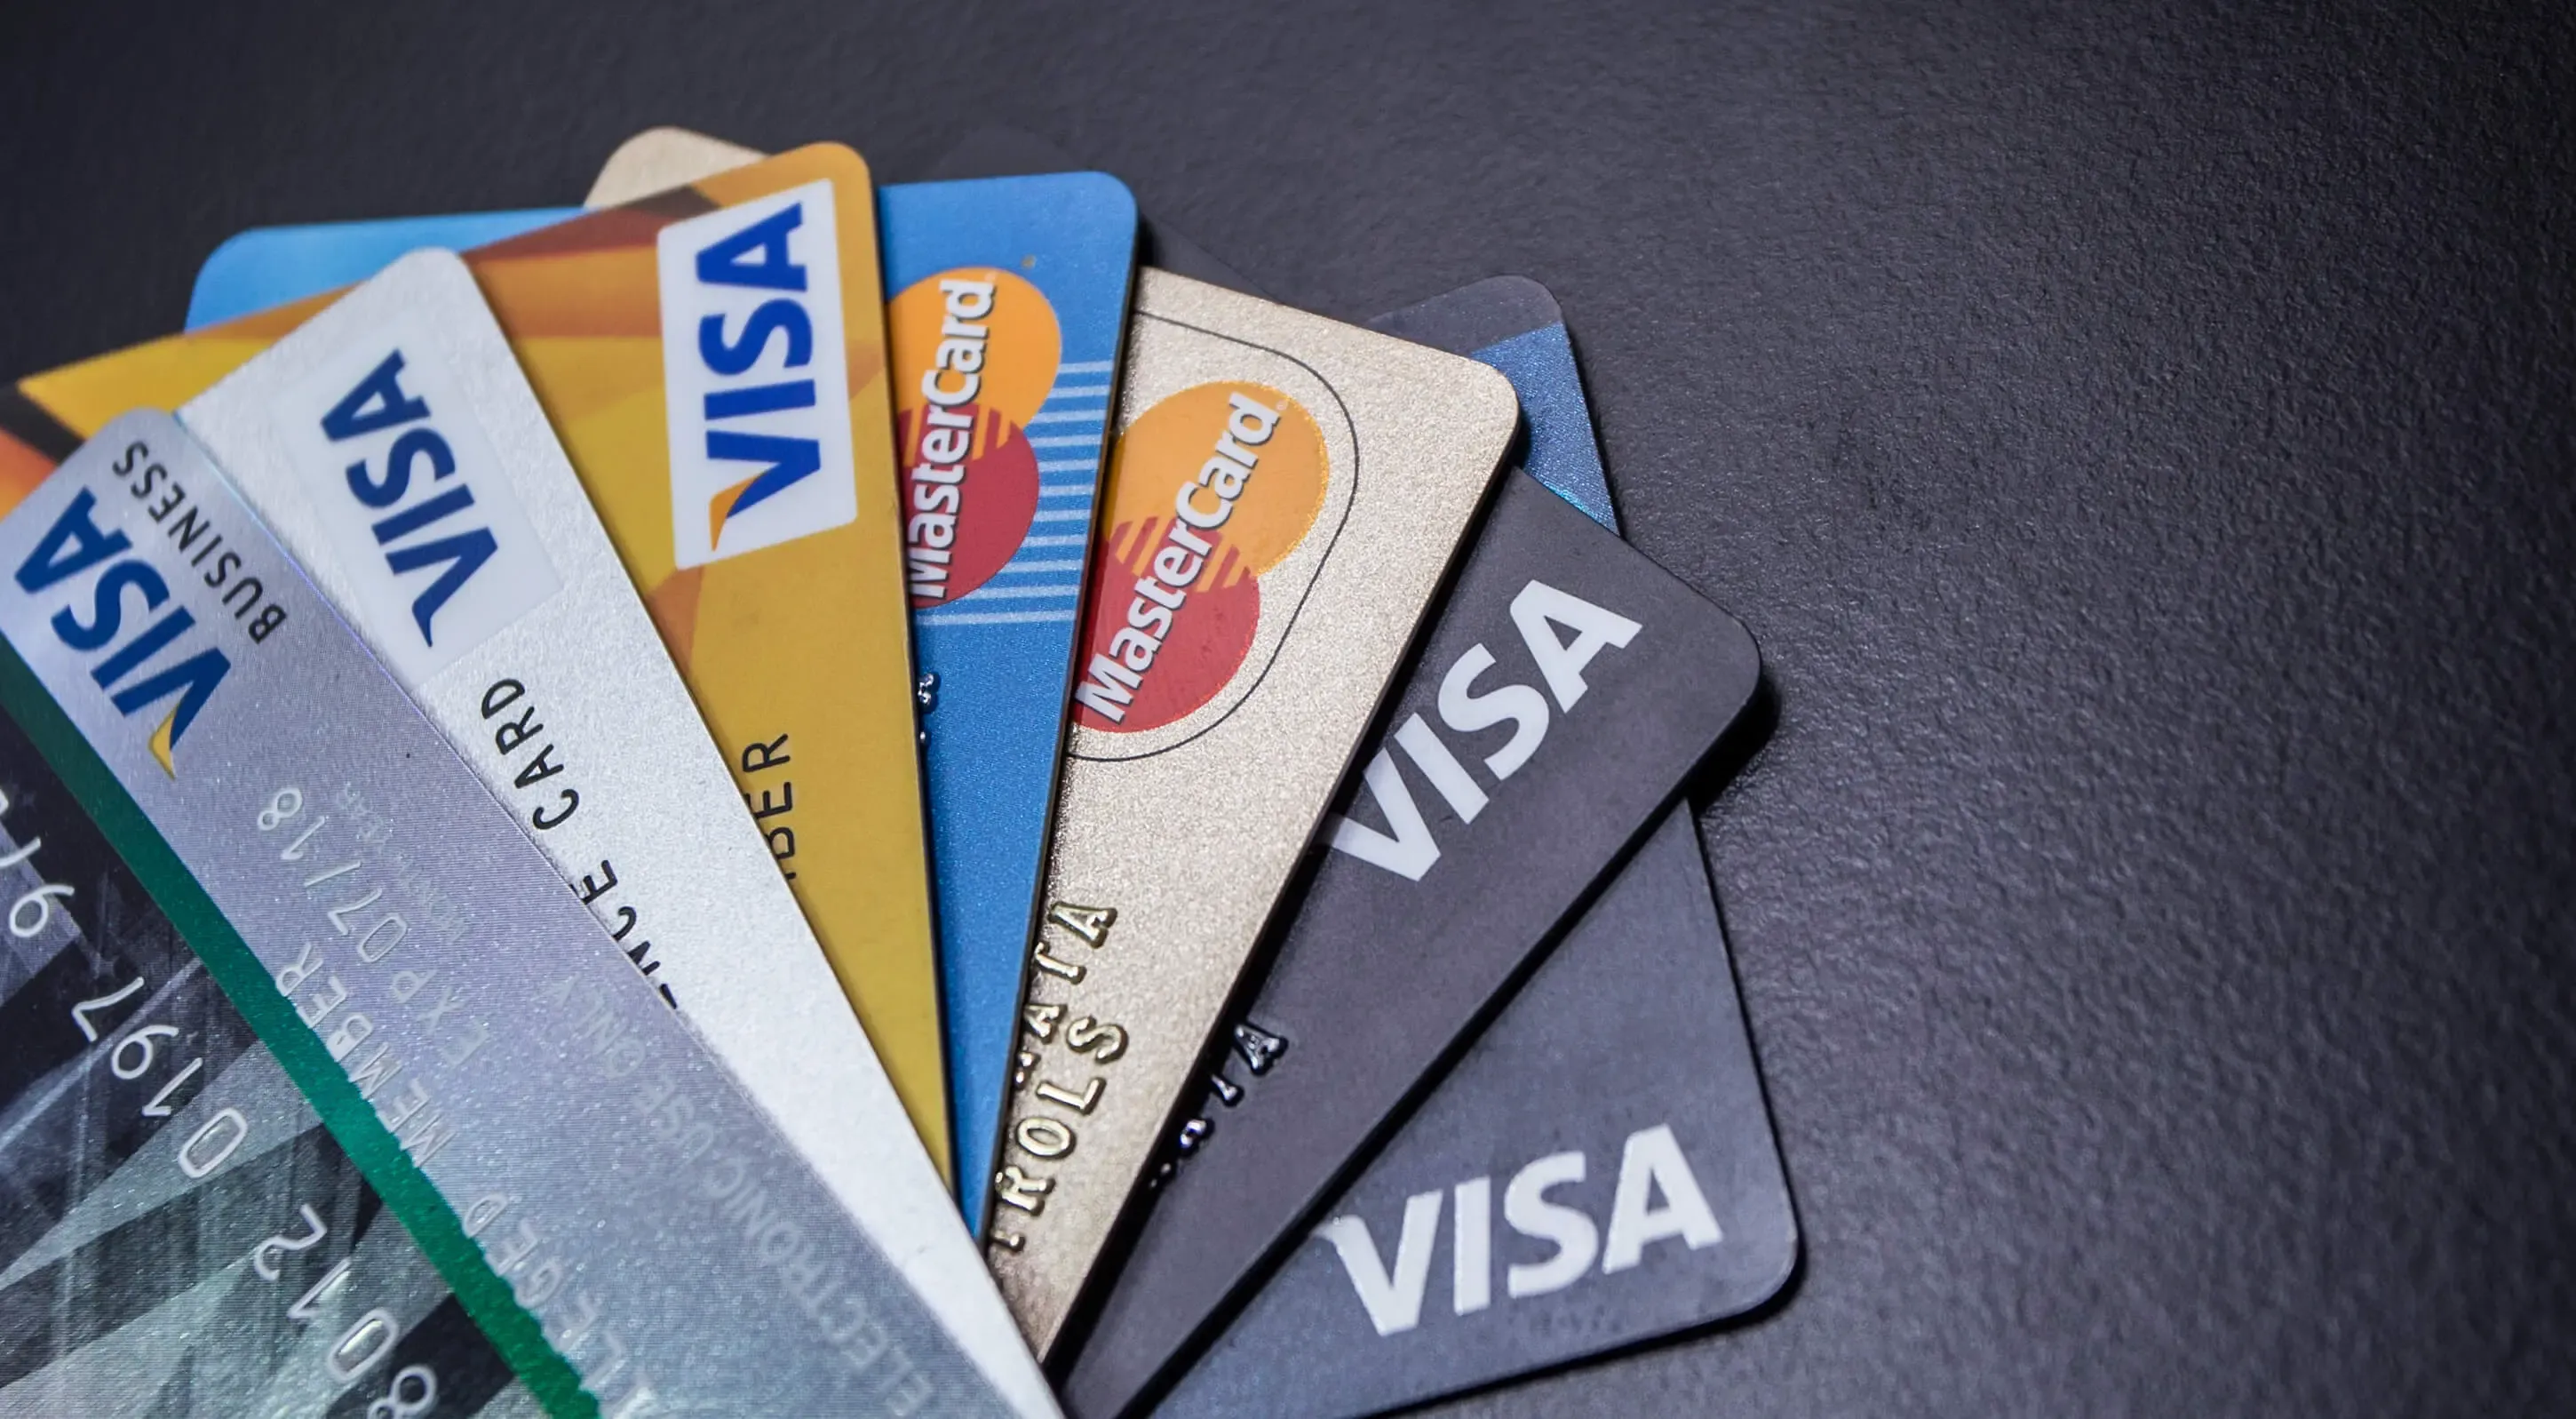 Mastercard and Visa credit cards fanned out